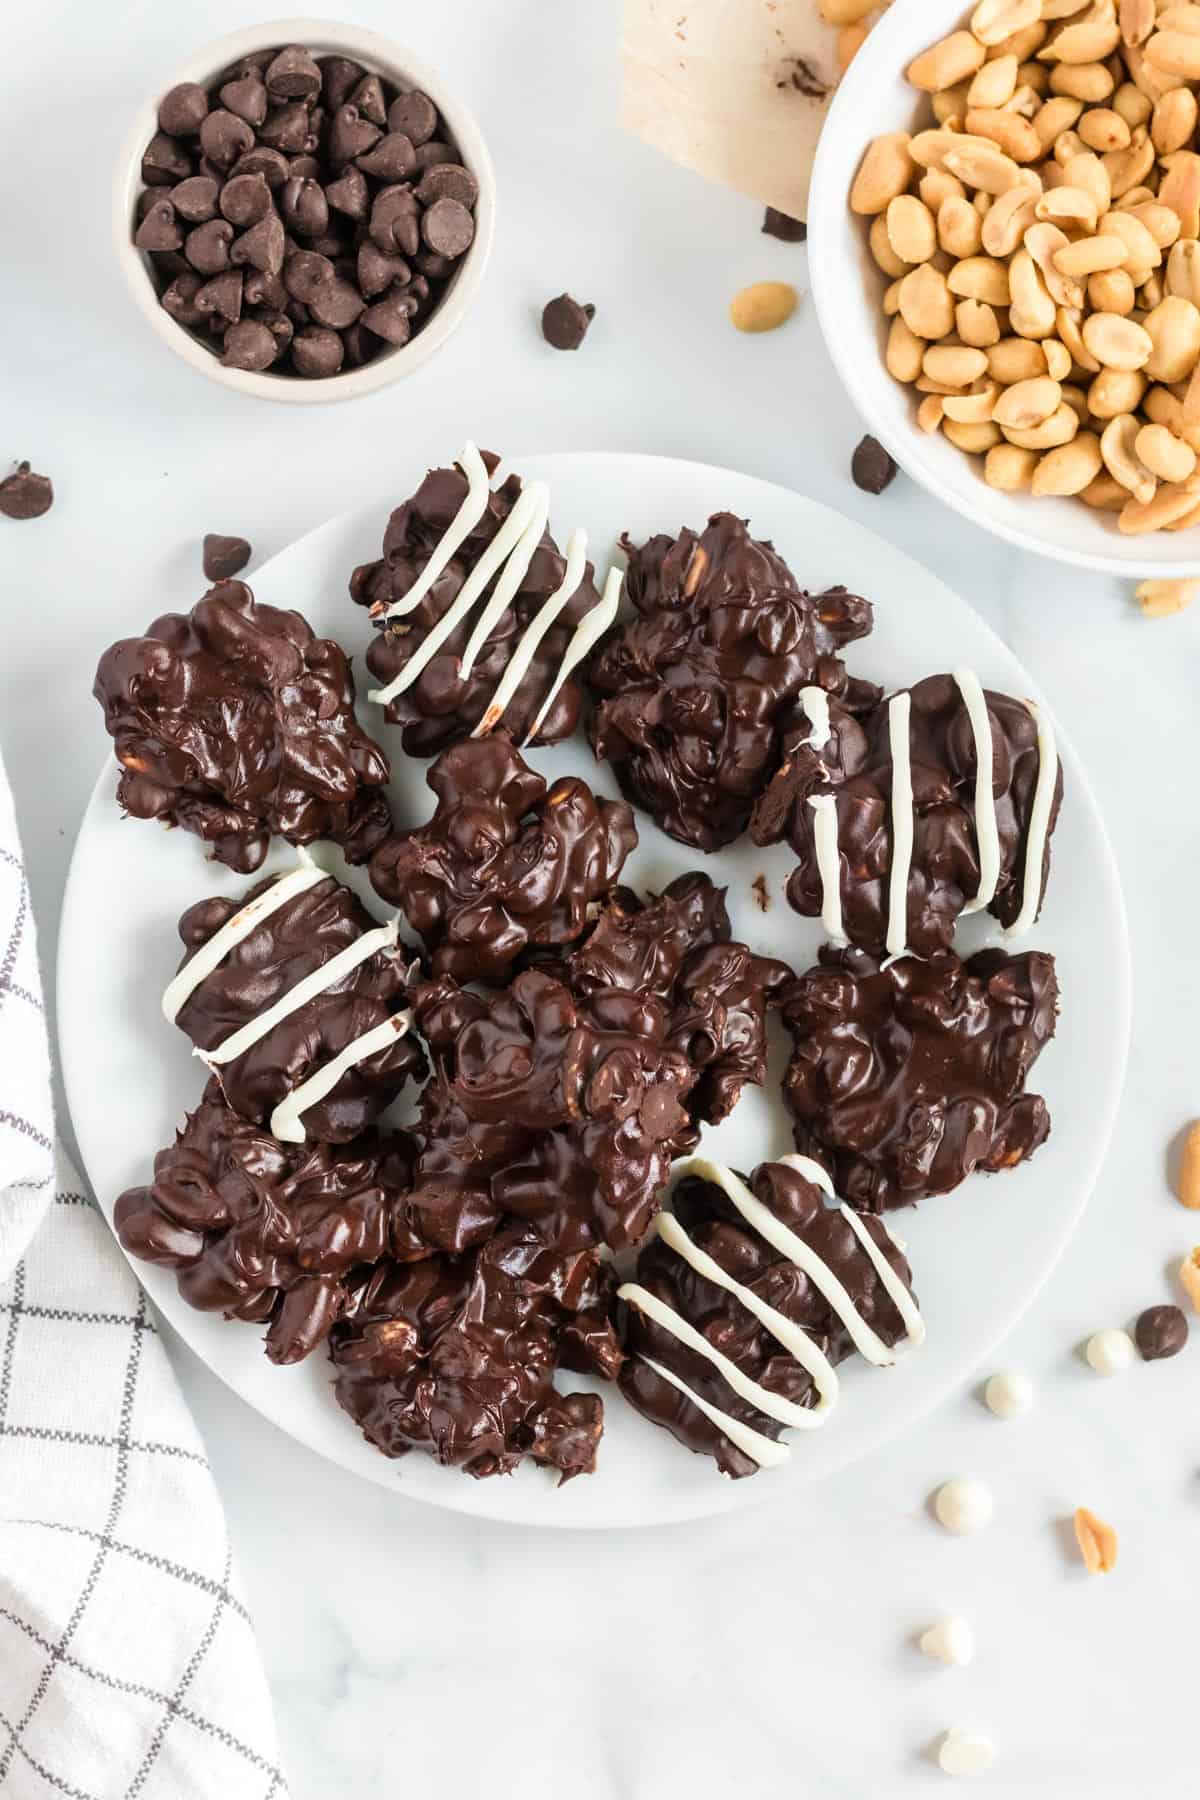 peanut clusters on a white plate, some plain and some drizzled with white chocolate